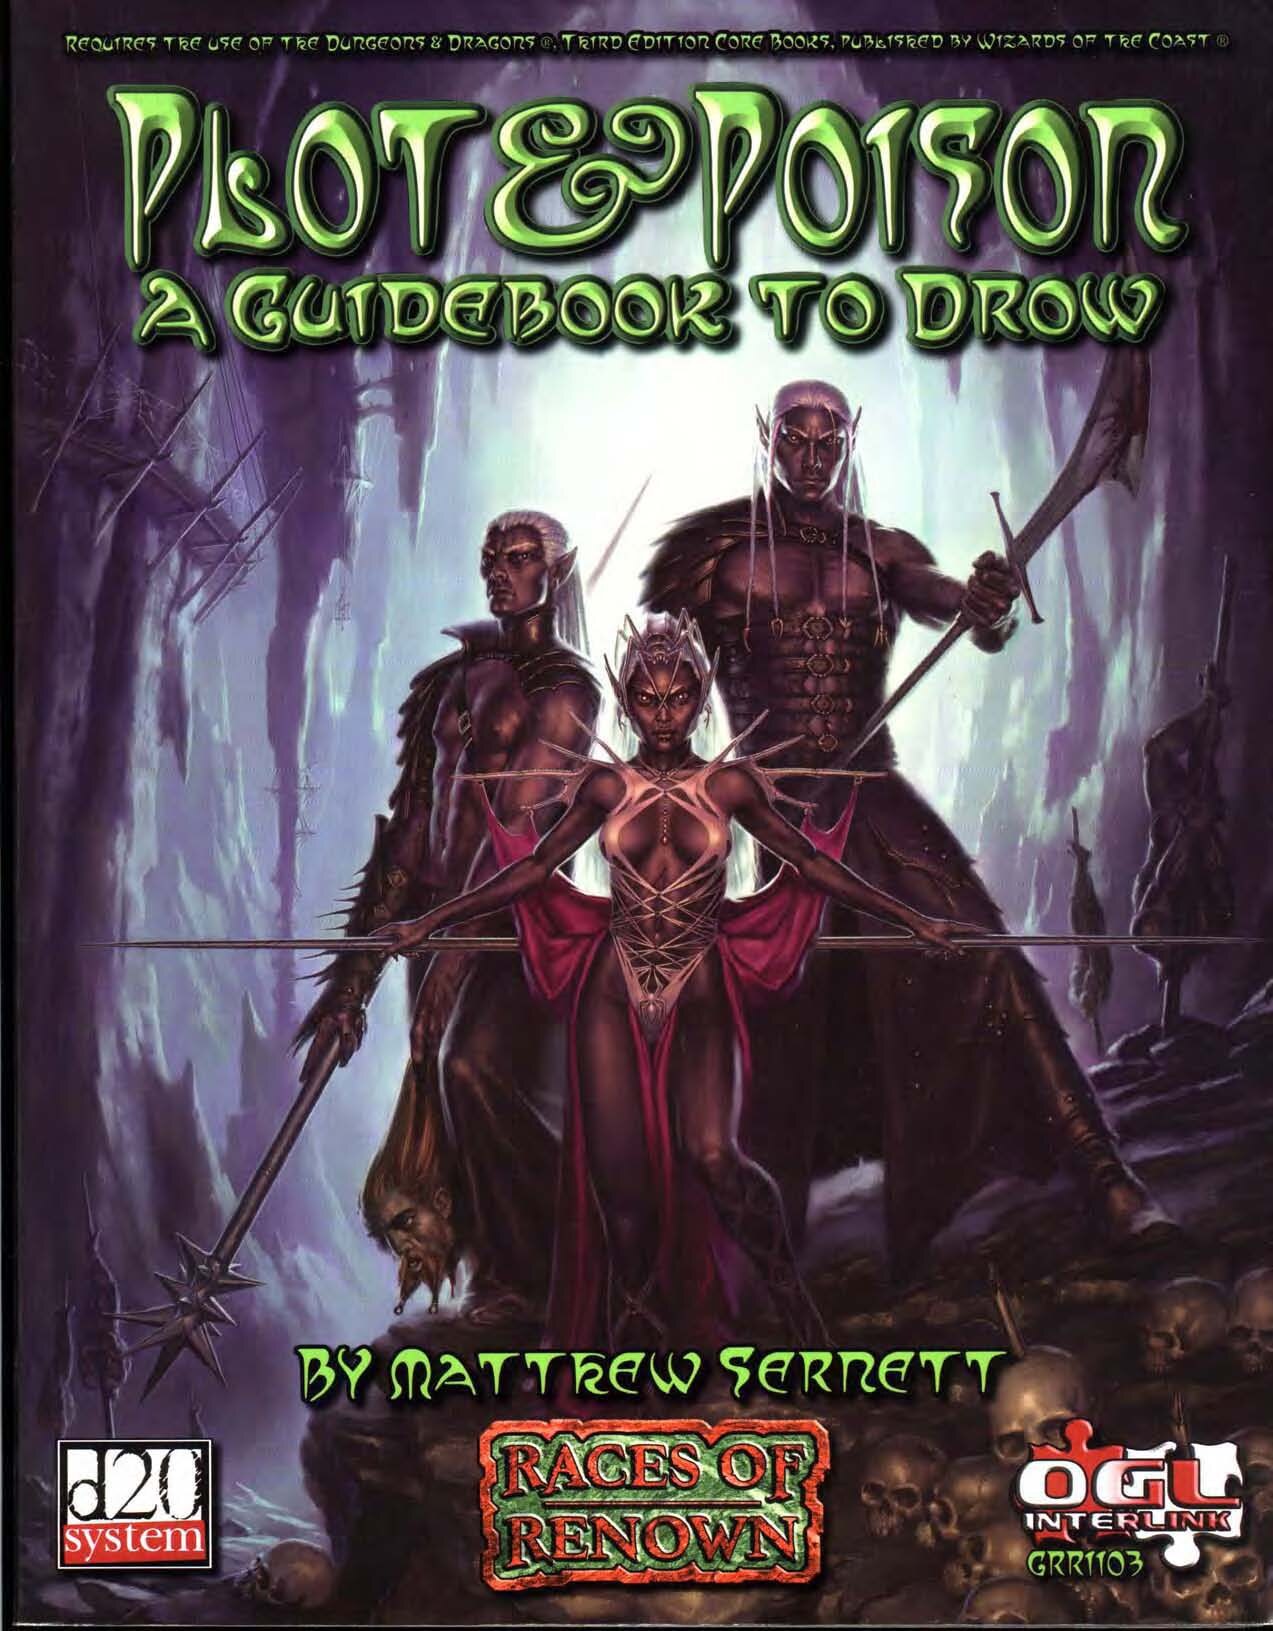 Plot & Poison. A Guidebook To Drow